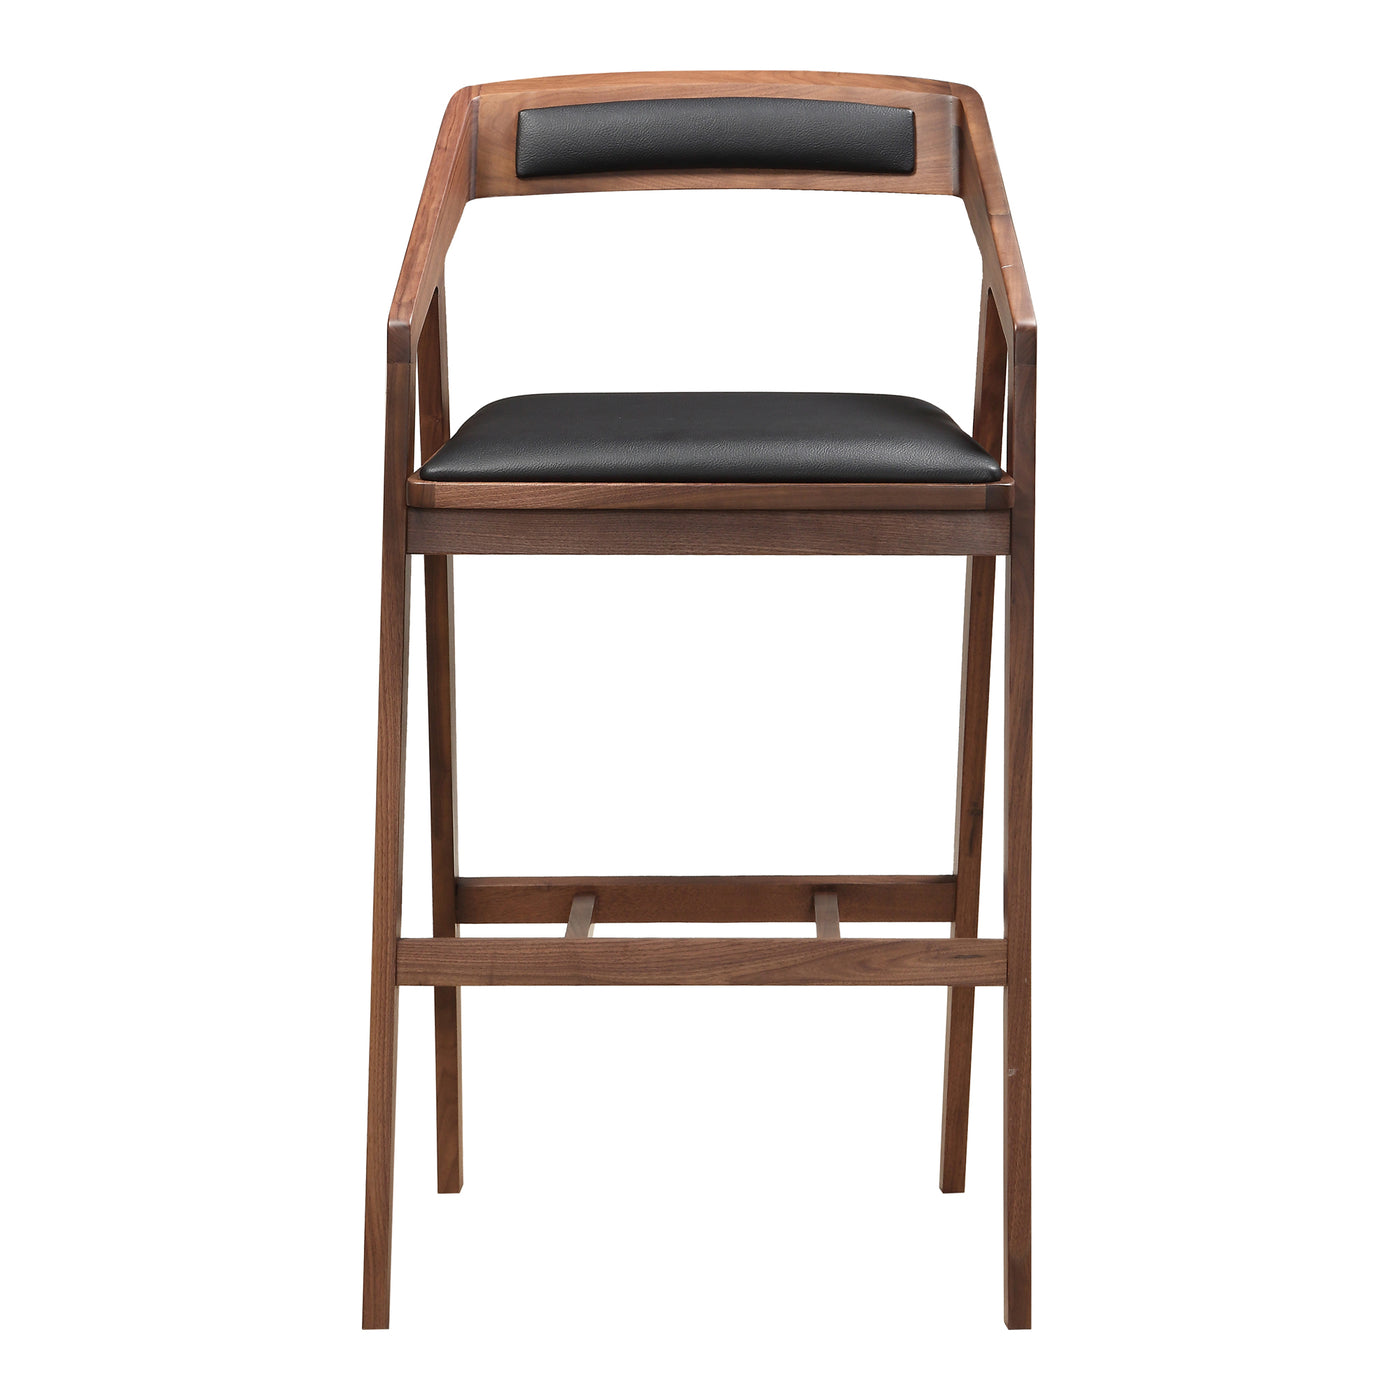 Streamlined with all the mid-century modern vibes you can settle right into, the Padma barstool brings ultimate comfort wi...